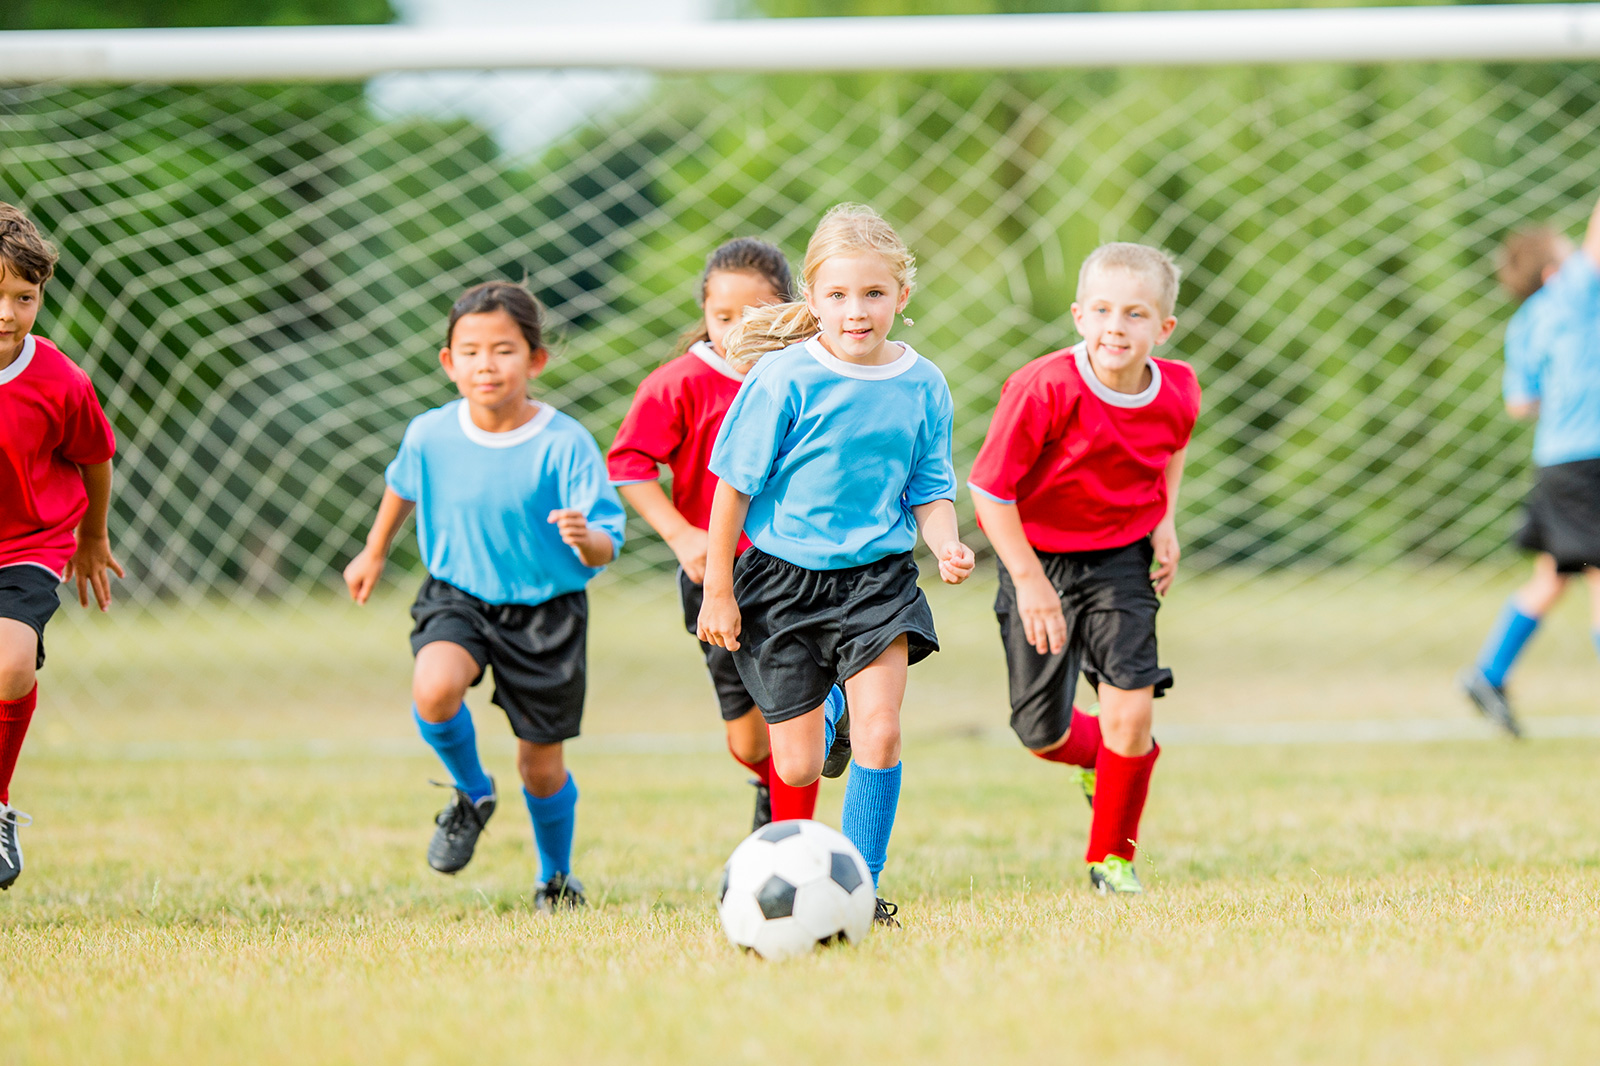 Sports Advantages: How Can Sports Help A Child's Development?